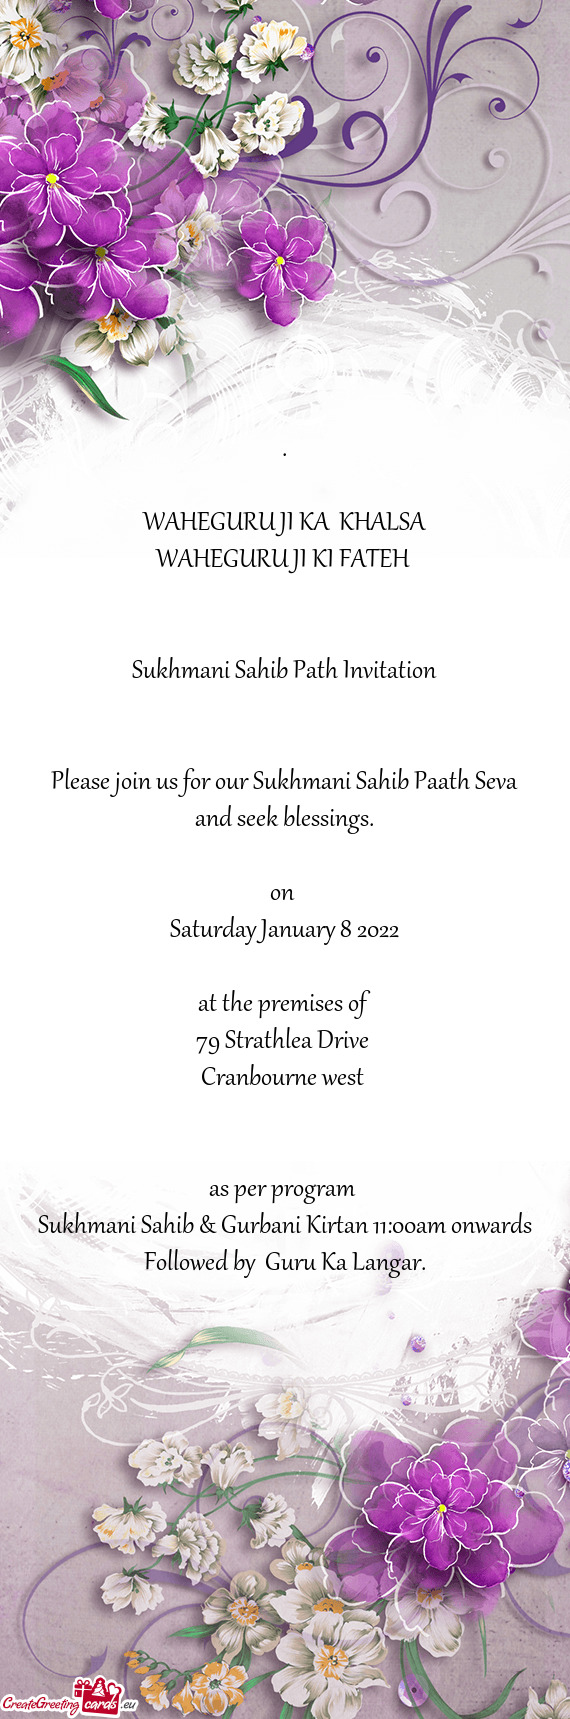 Please join us for our Sukhmani Sahib Paath Seva and seek blessings